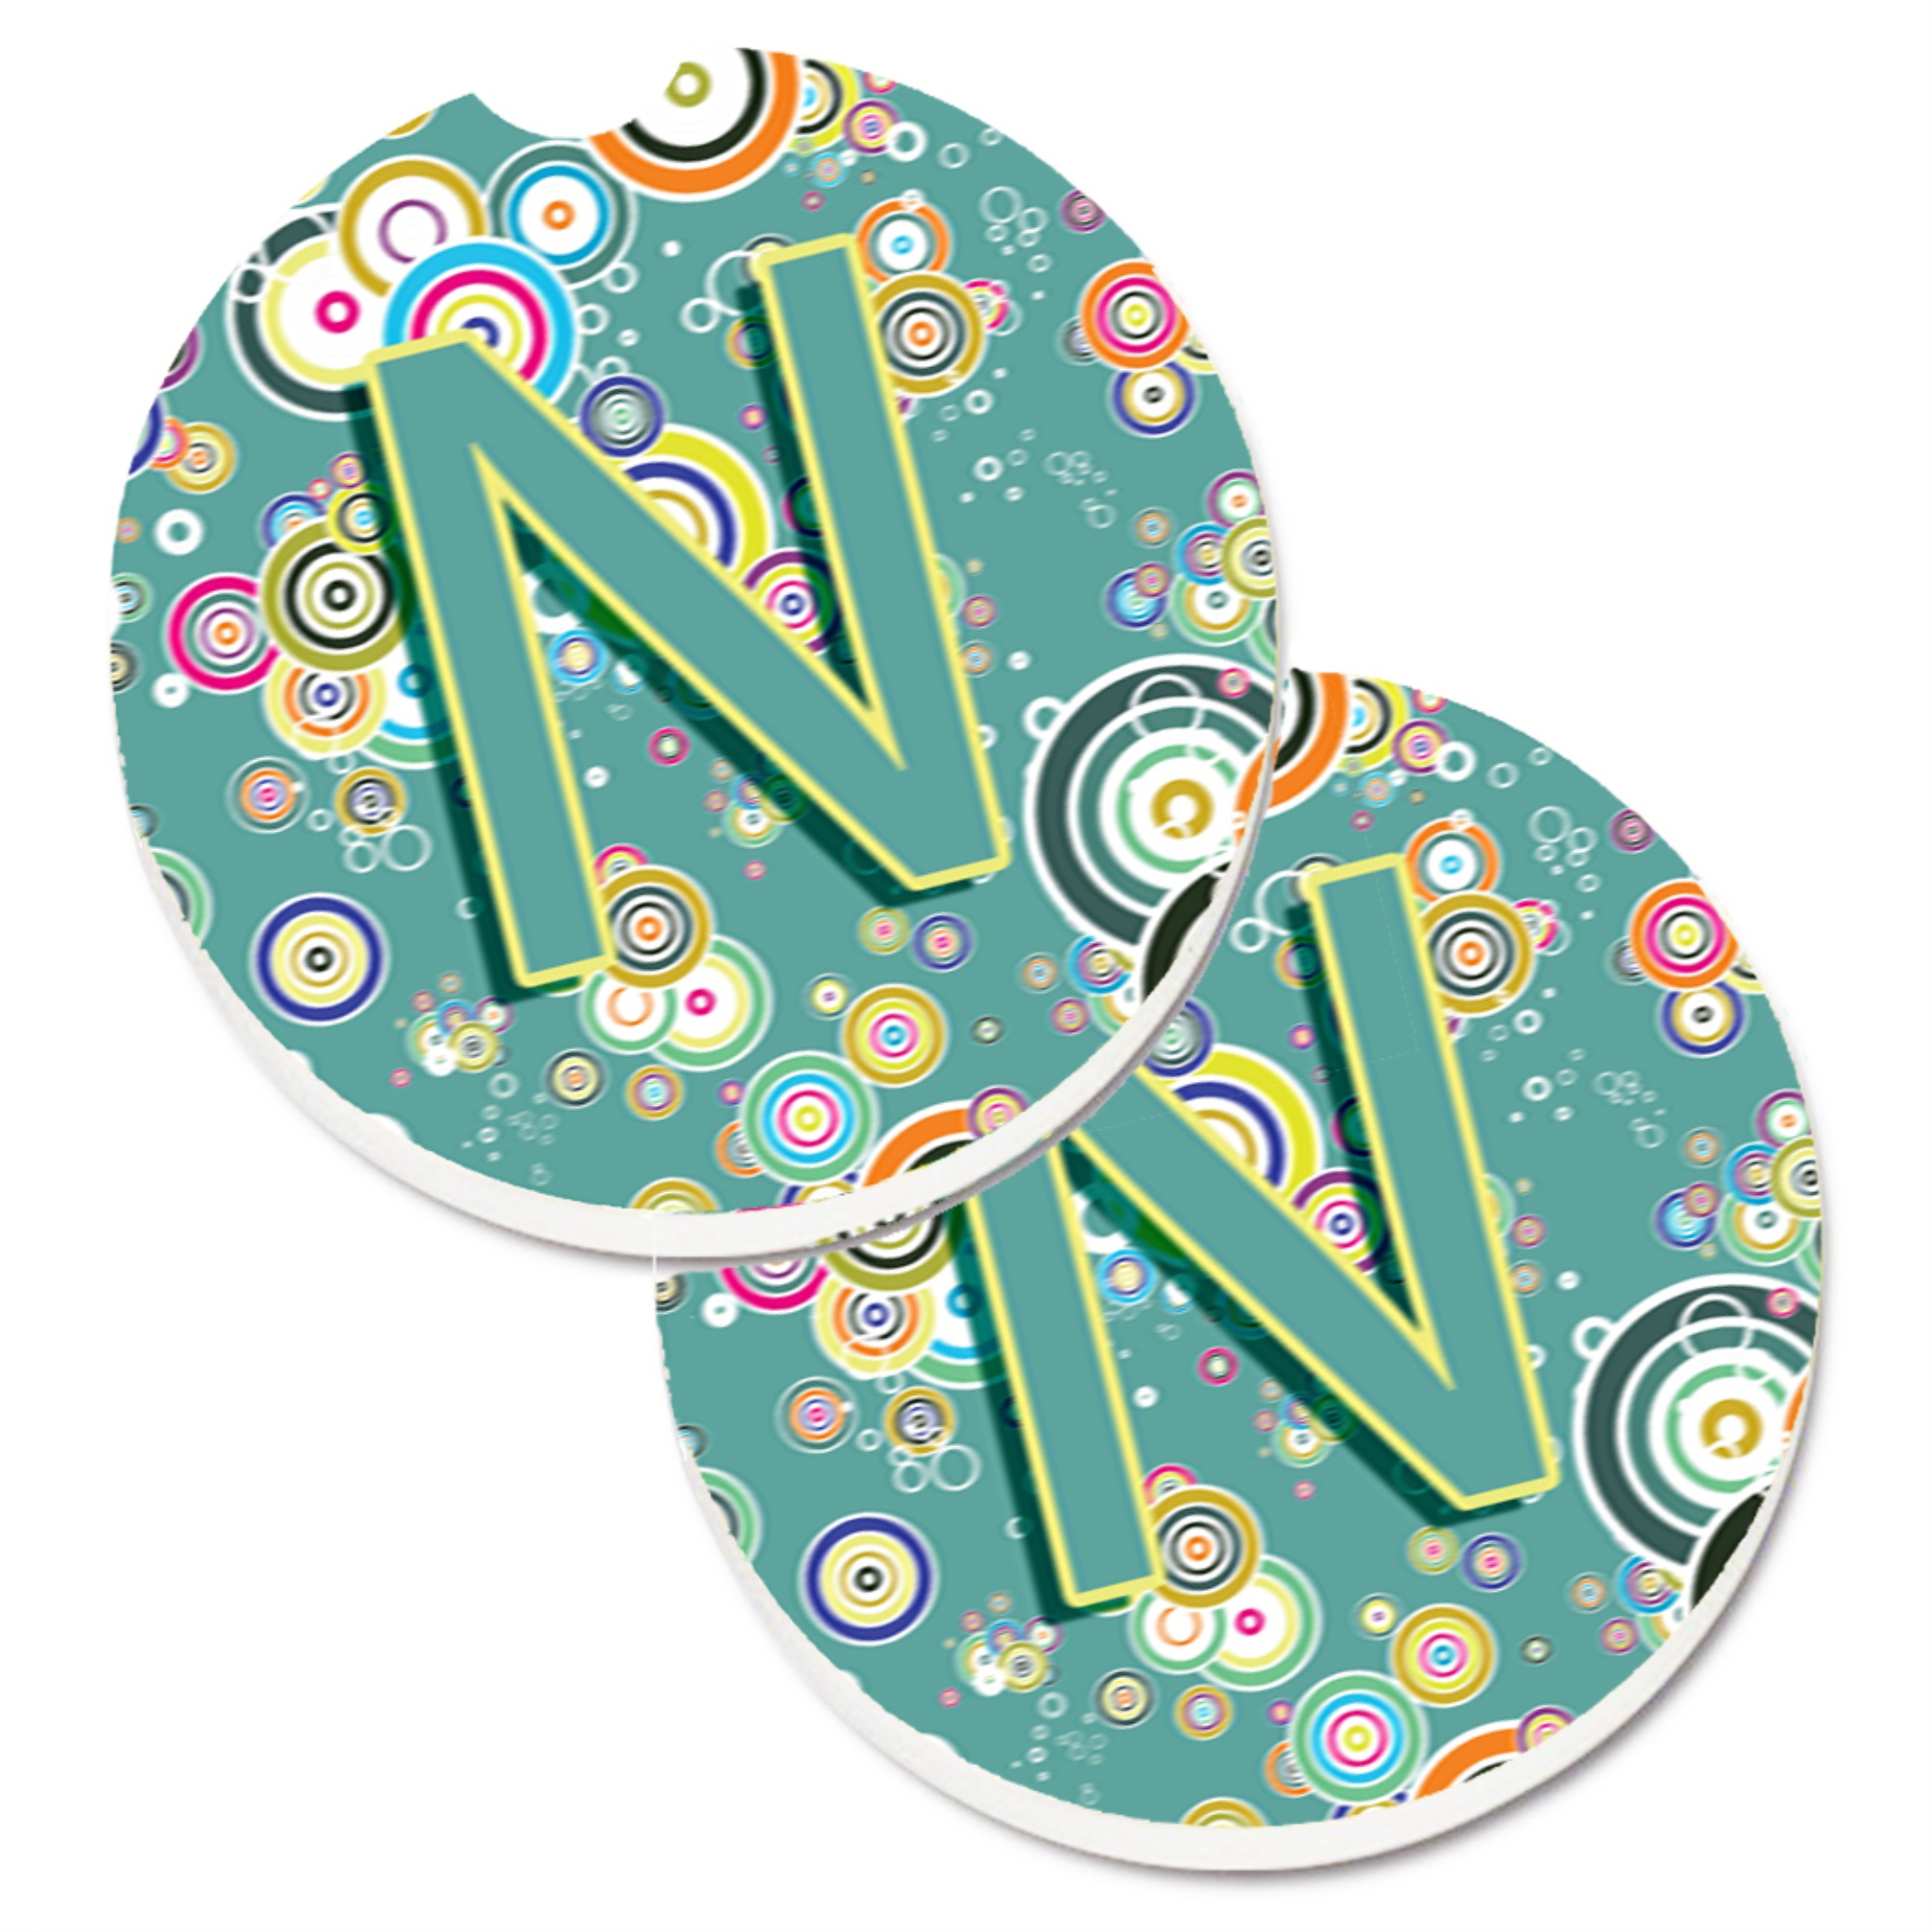 Caroline's Treasures "Caroline's Treasures Letter N Circle Teal Initial Alphabet Set of 2 Cup Holder Car Coasters CJ2015-NCARC, 2.56, Multicolor"